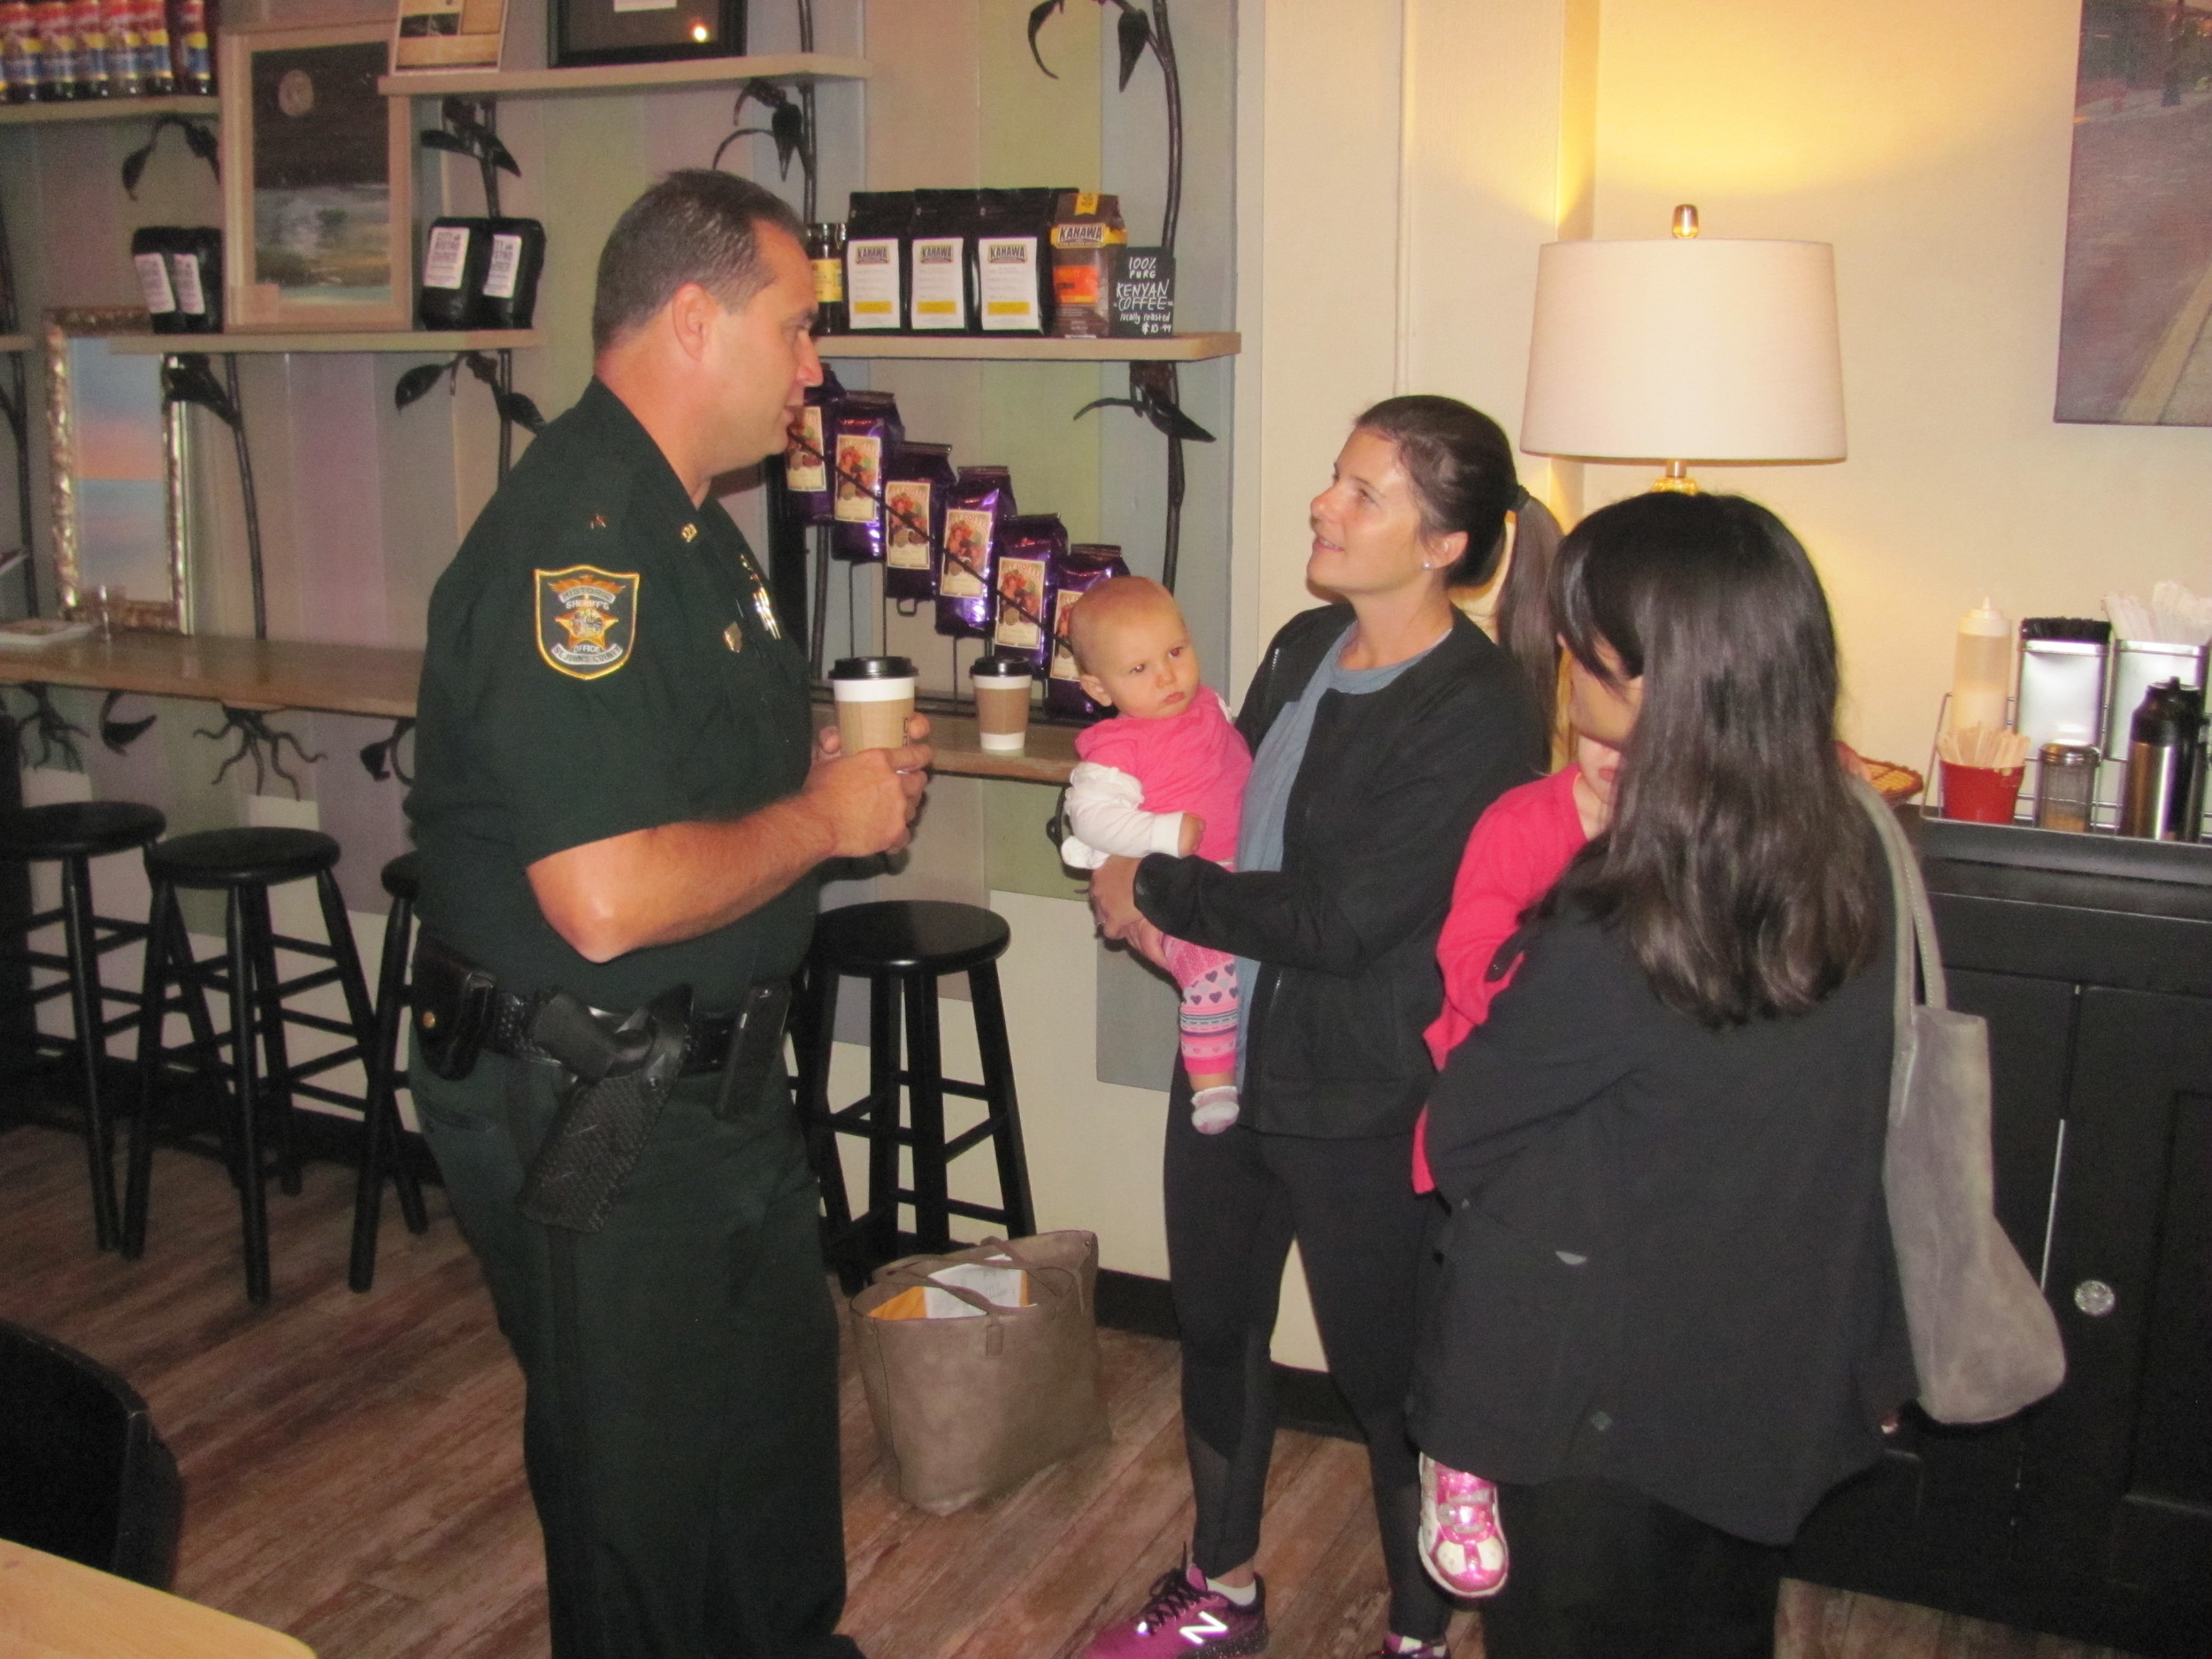 Commander Scott Beaver from the St. Johns County Sheriff’s Office speaks with a group of residents at Coffee with a Cop.